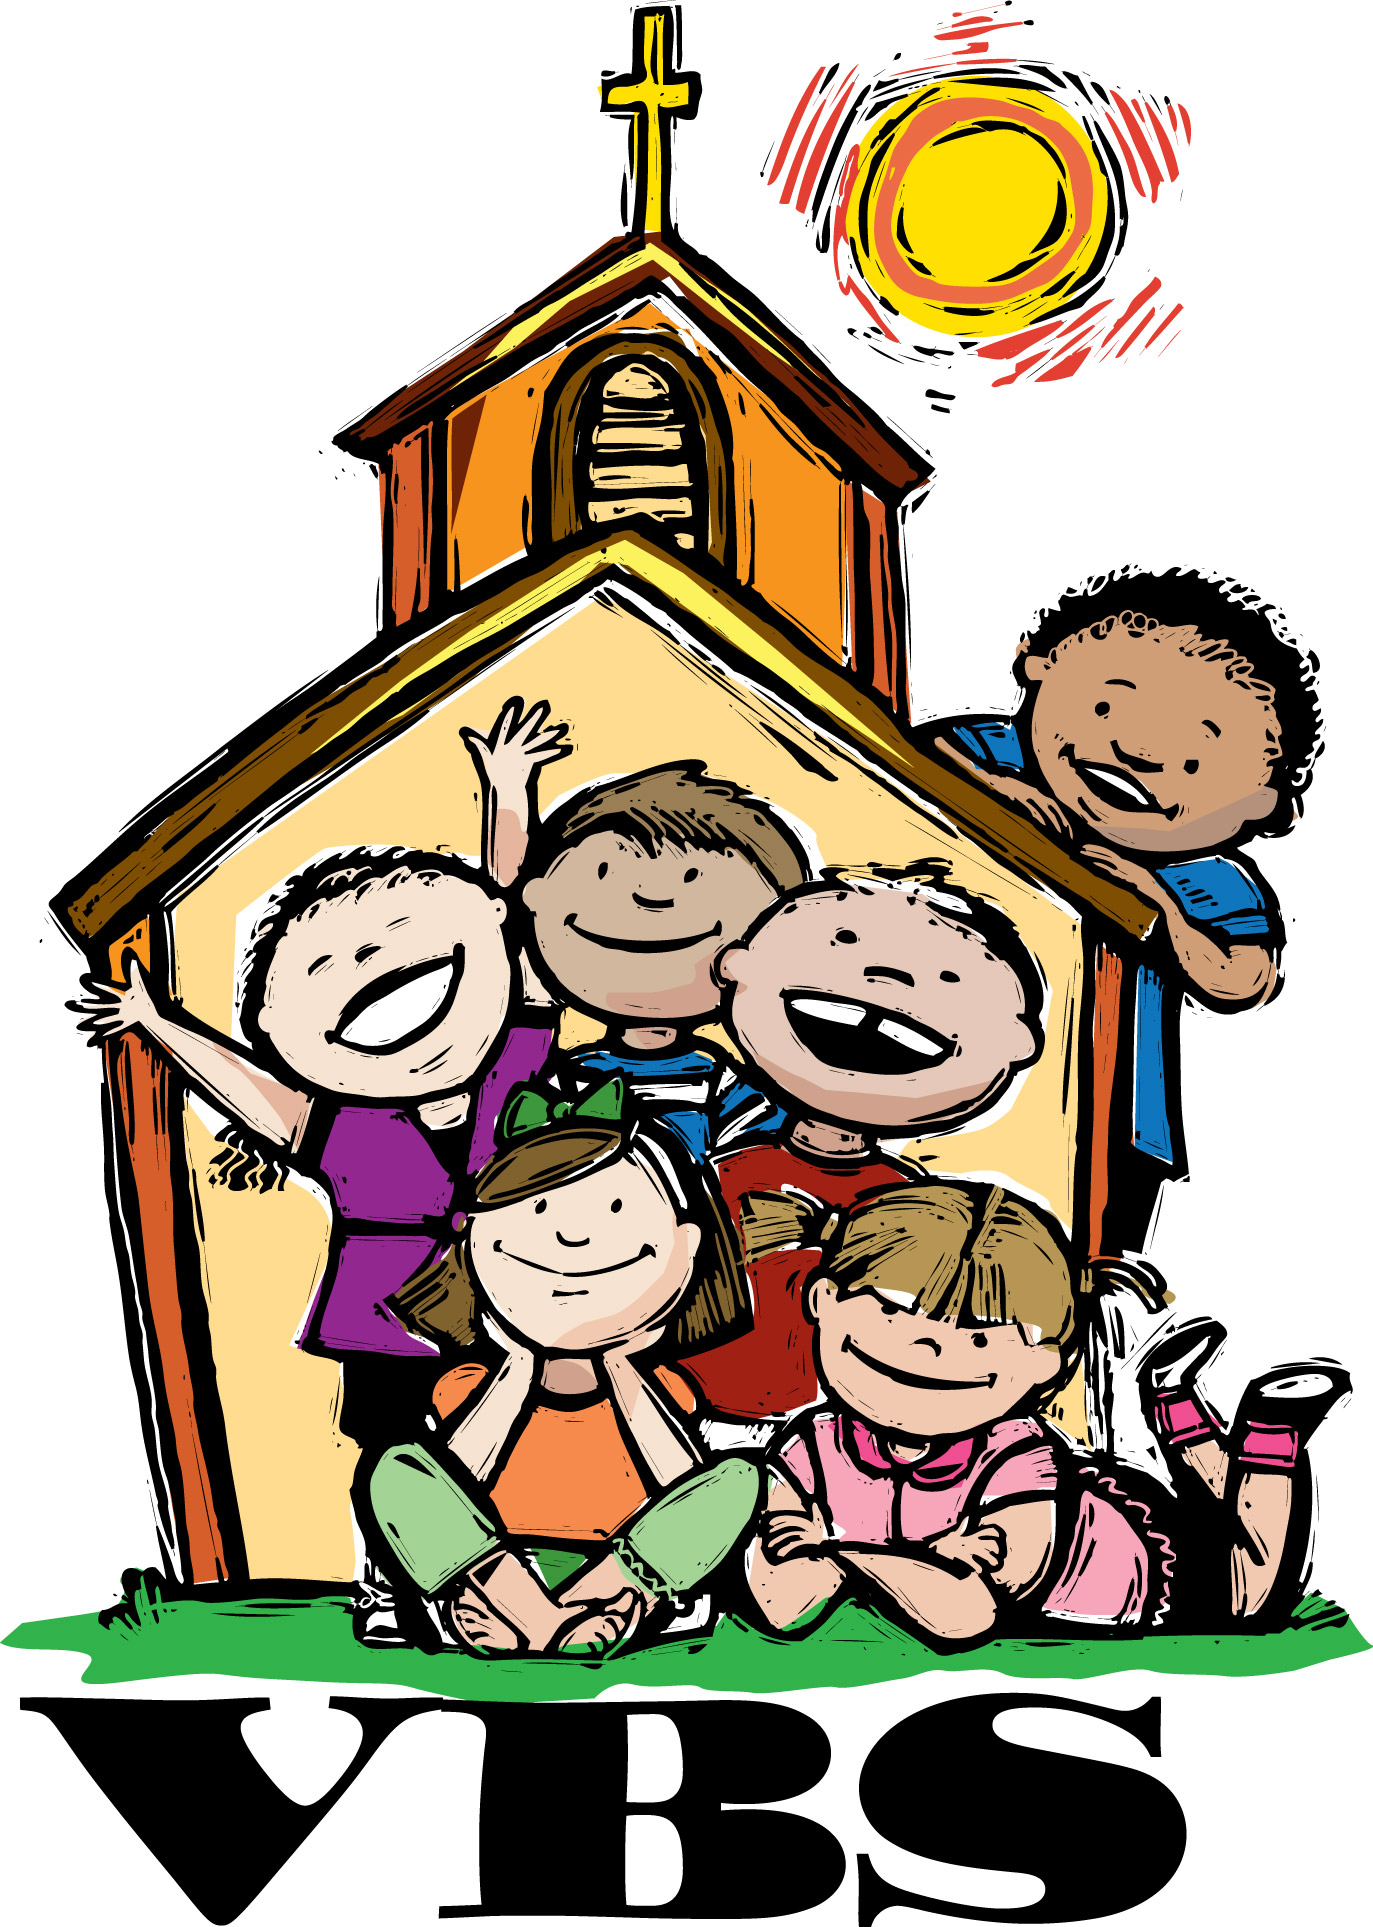 sign up for VBS clipart. u002